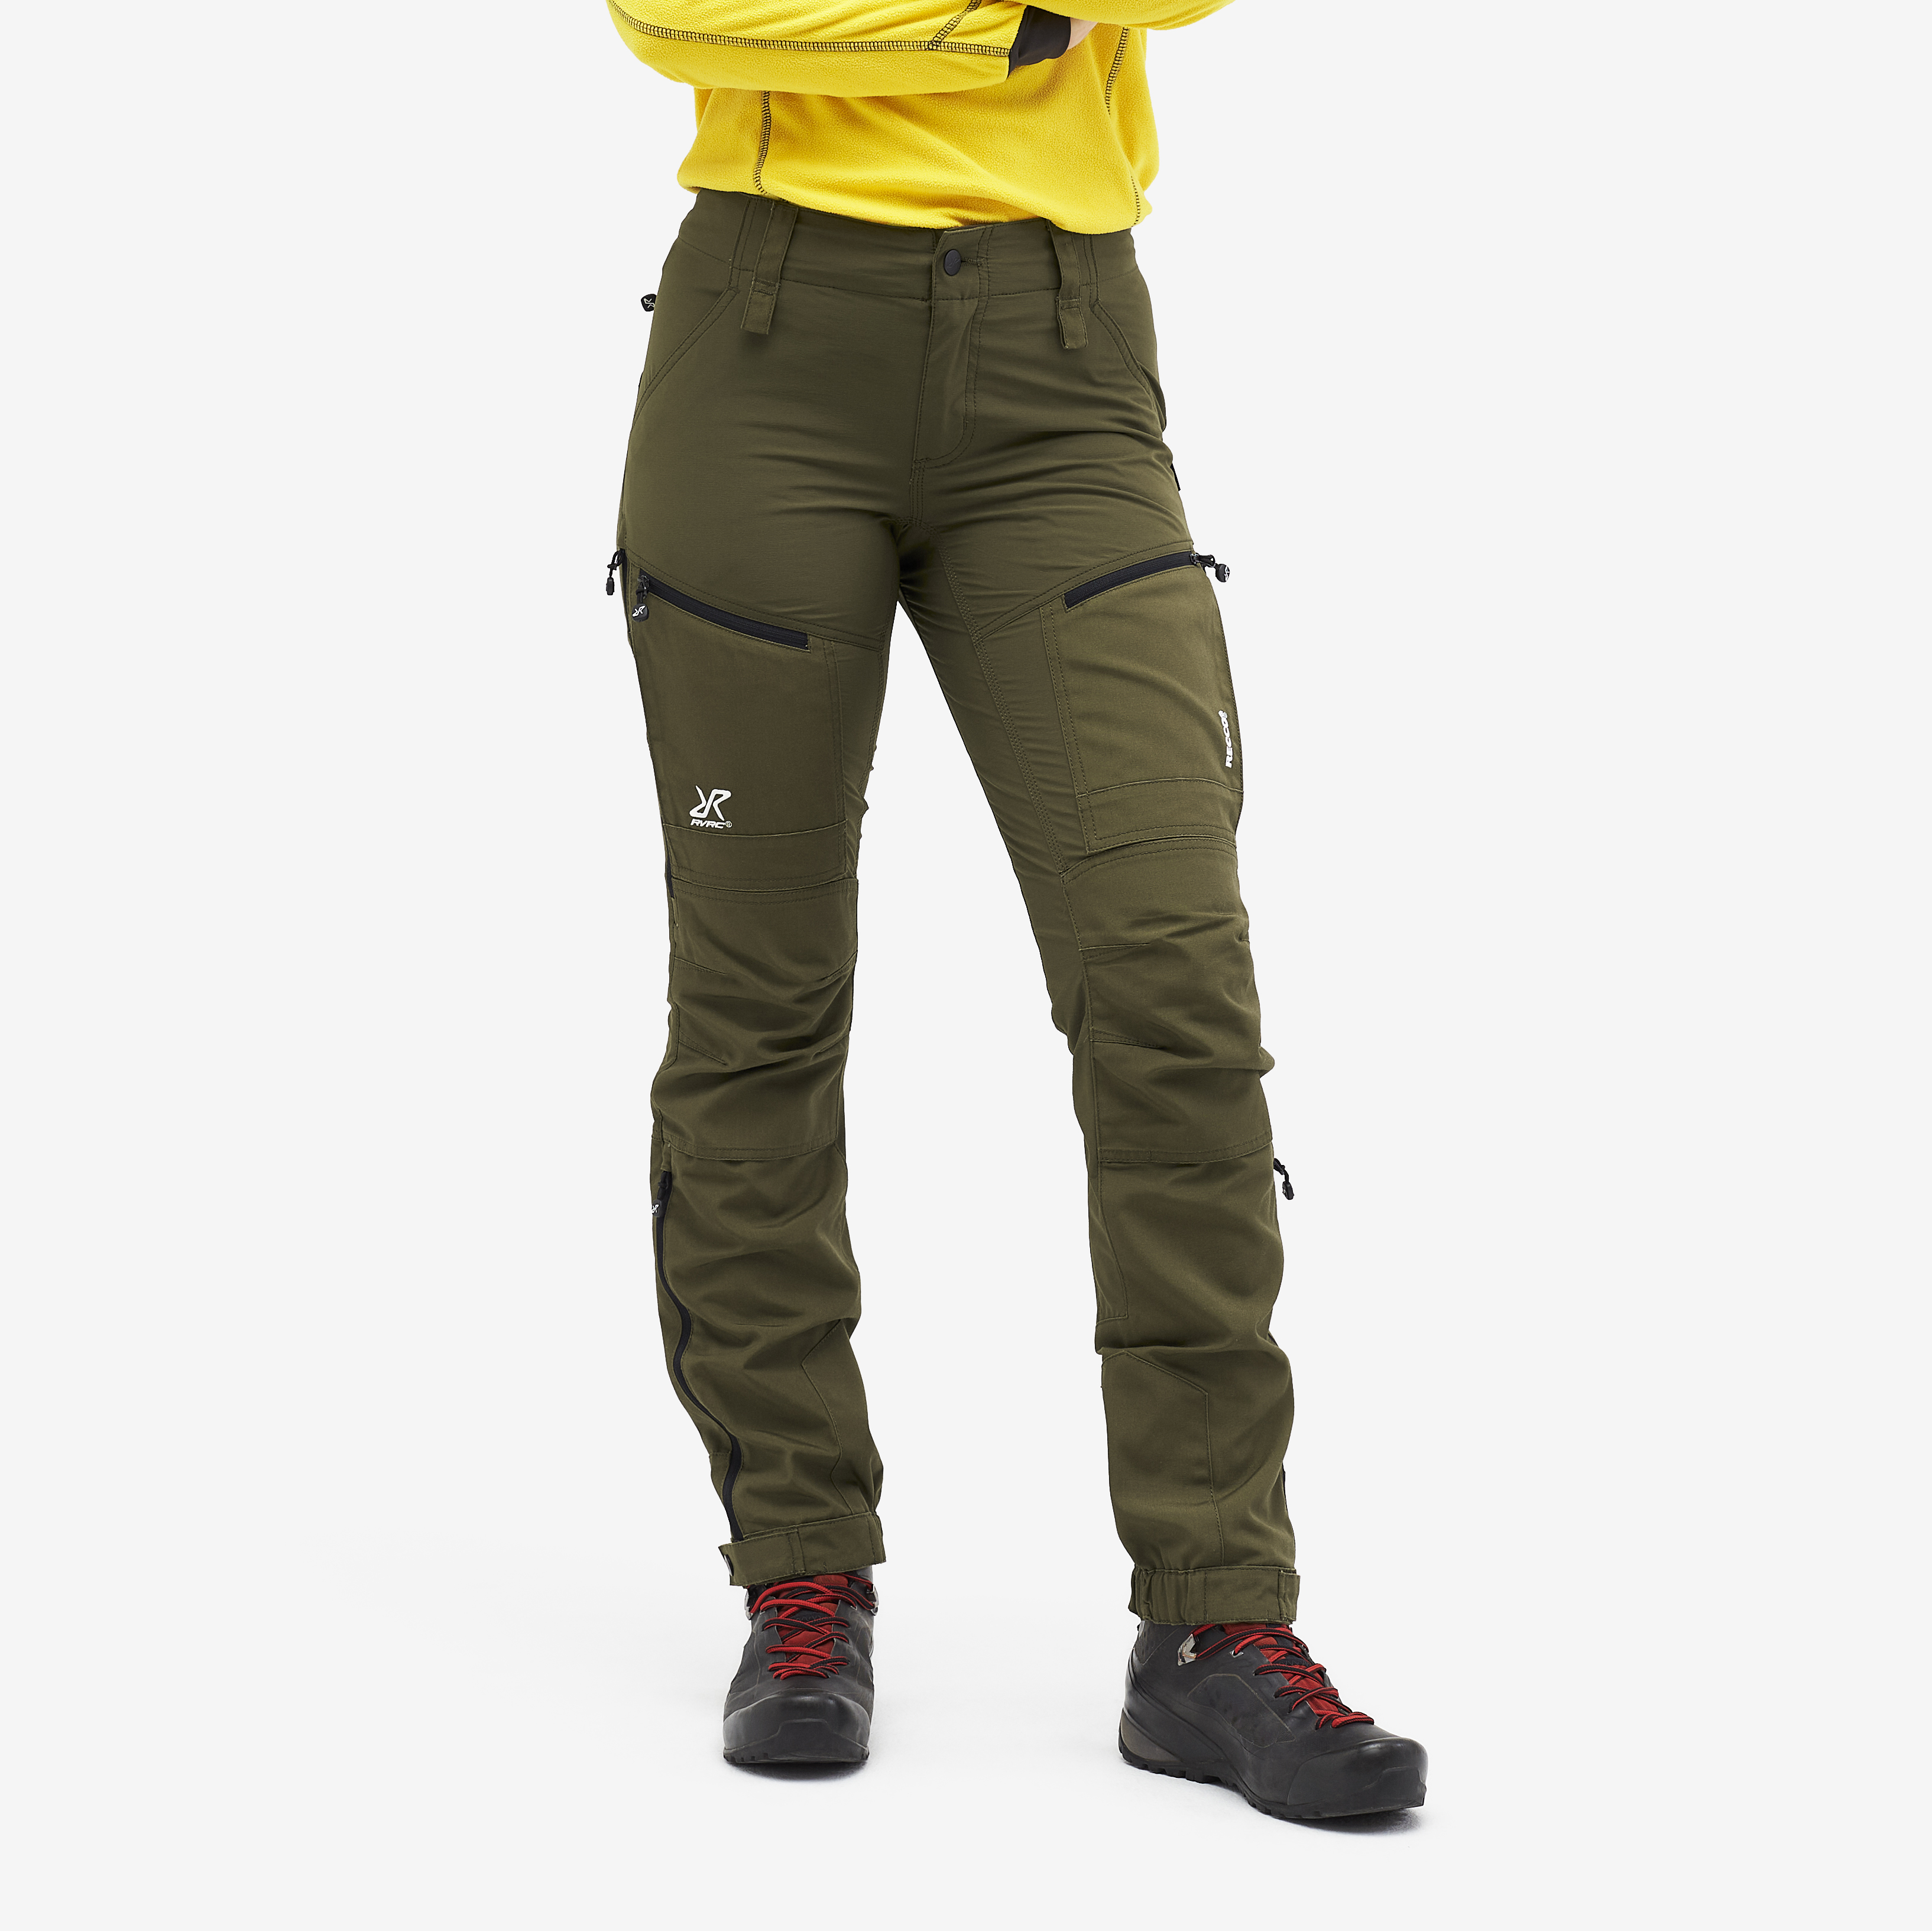 Nordwand outdoor pants for women in green